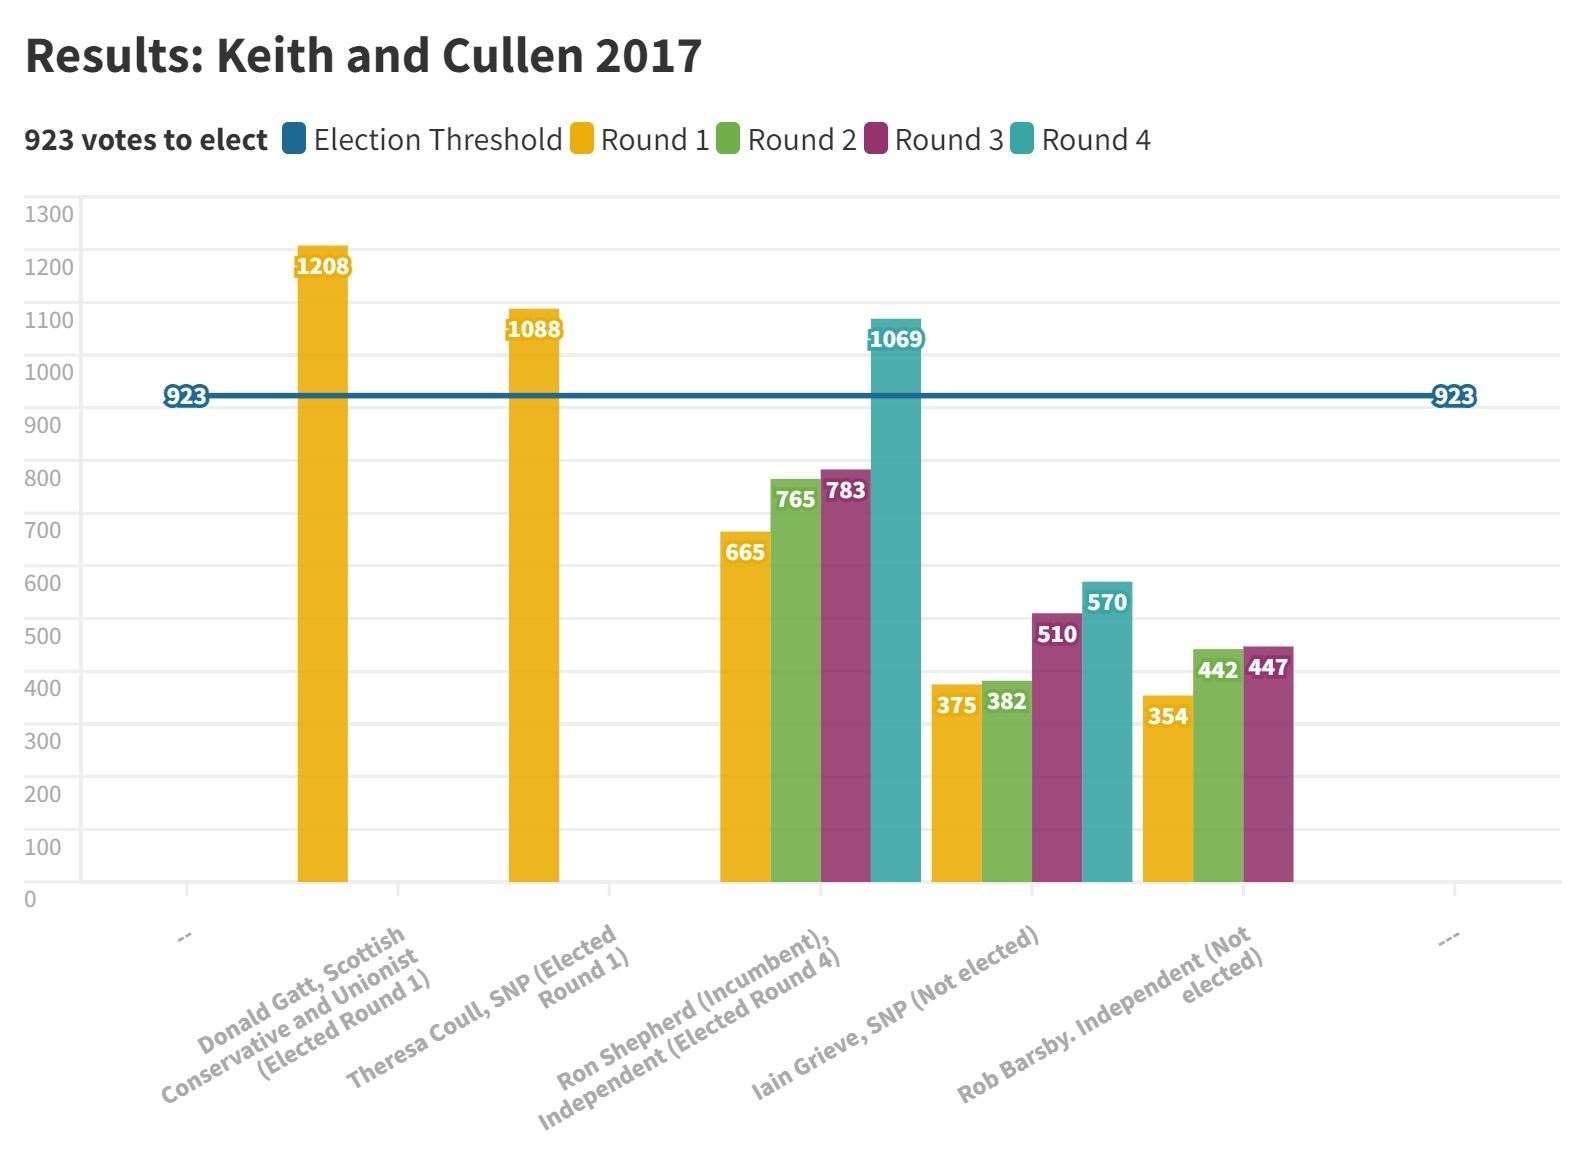 The results from 2017's local council election in Keith and Cullen.